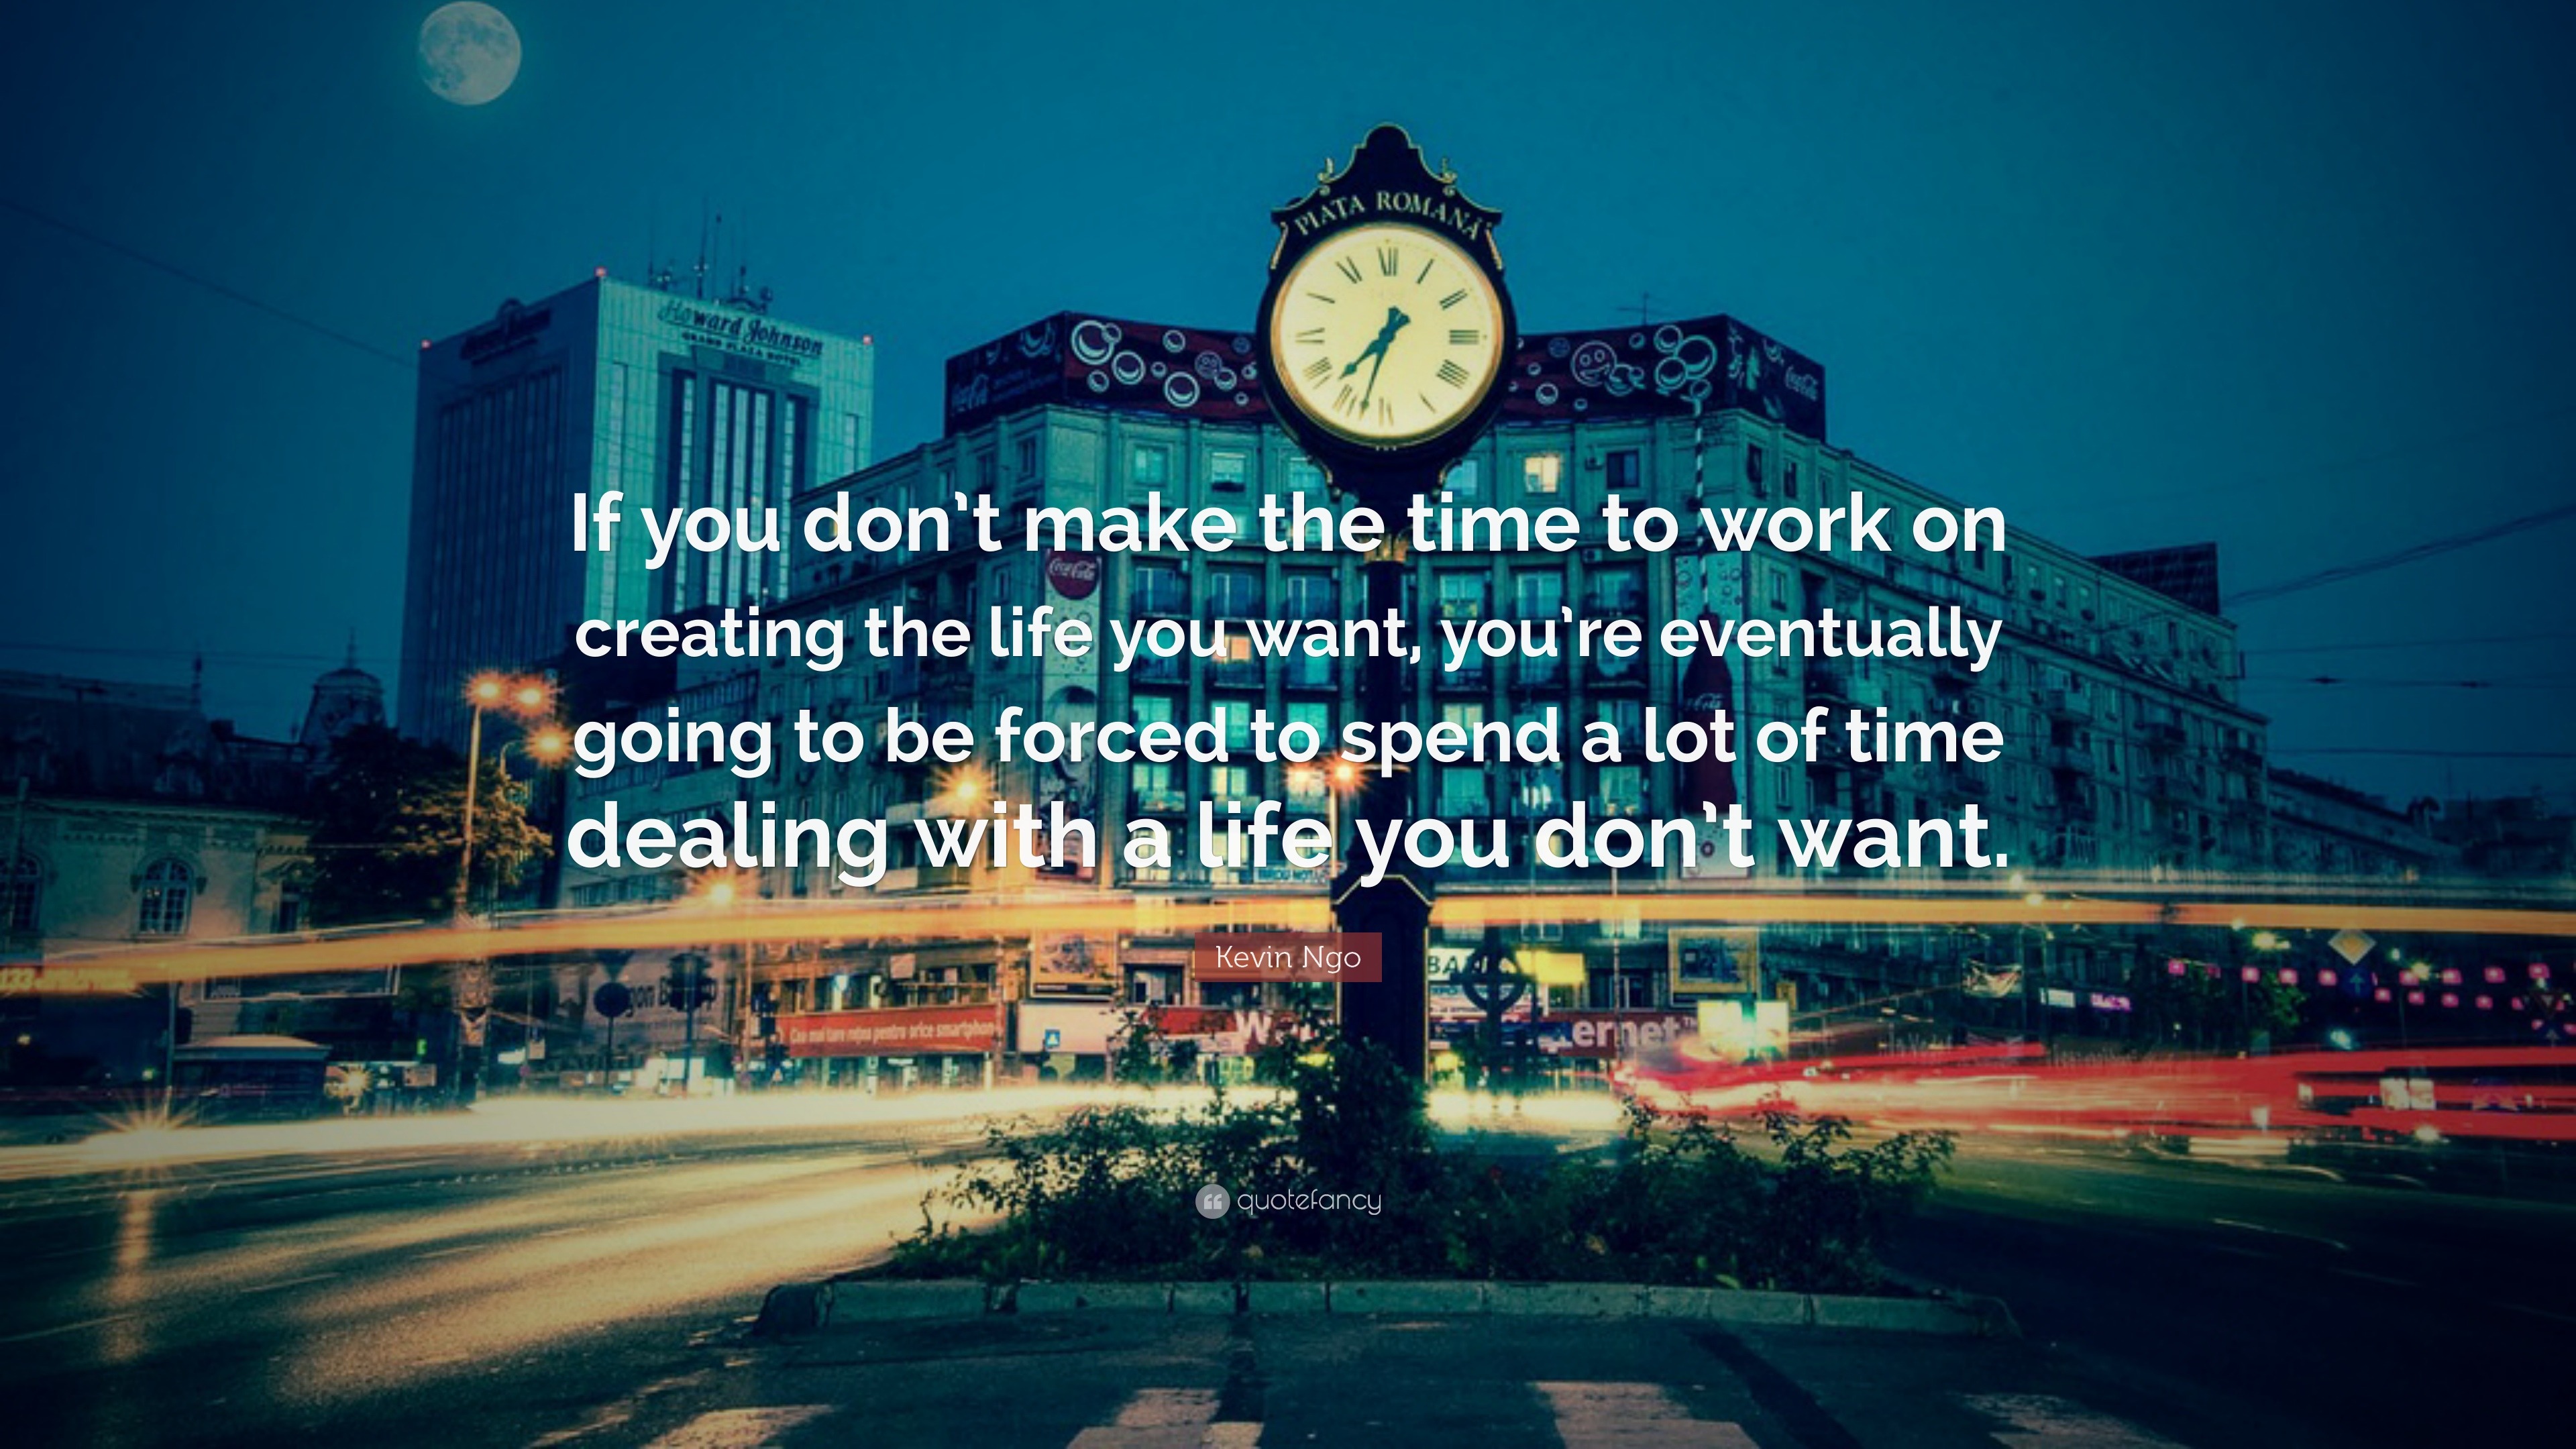 https://quotefancy.com/media/wallpaper/3840x2160/19003-Kevin-Ngo-Quote-If-you-don-t-make-the-time-to-work-on-creating-the.jpg